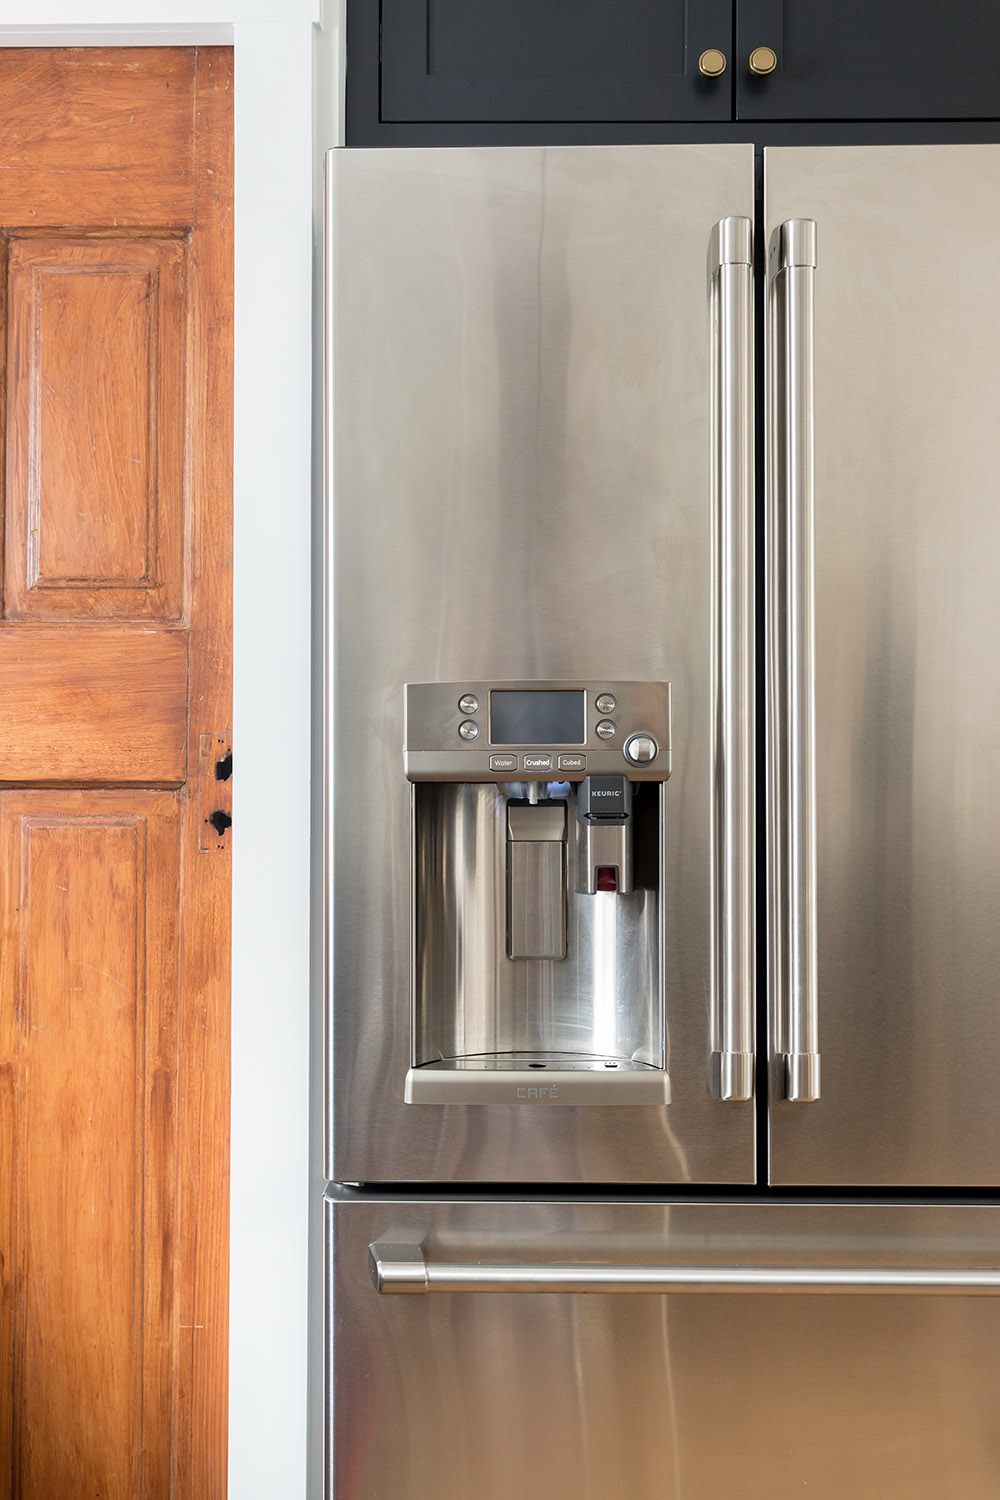 The front of a GE Cafe series stainless steel refrigerator.